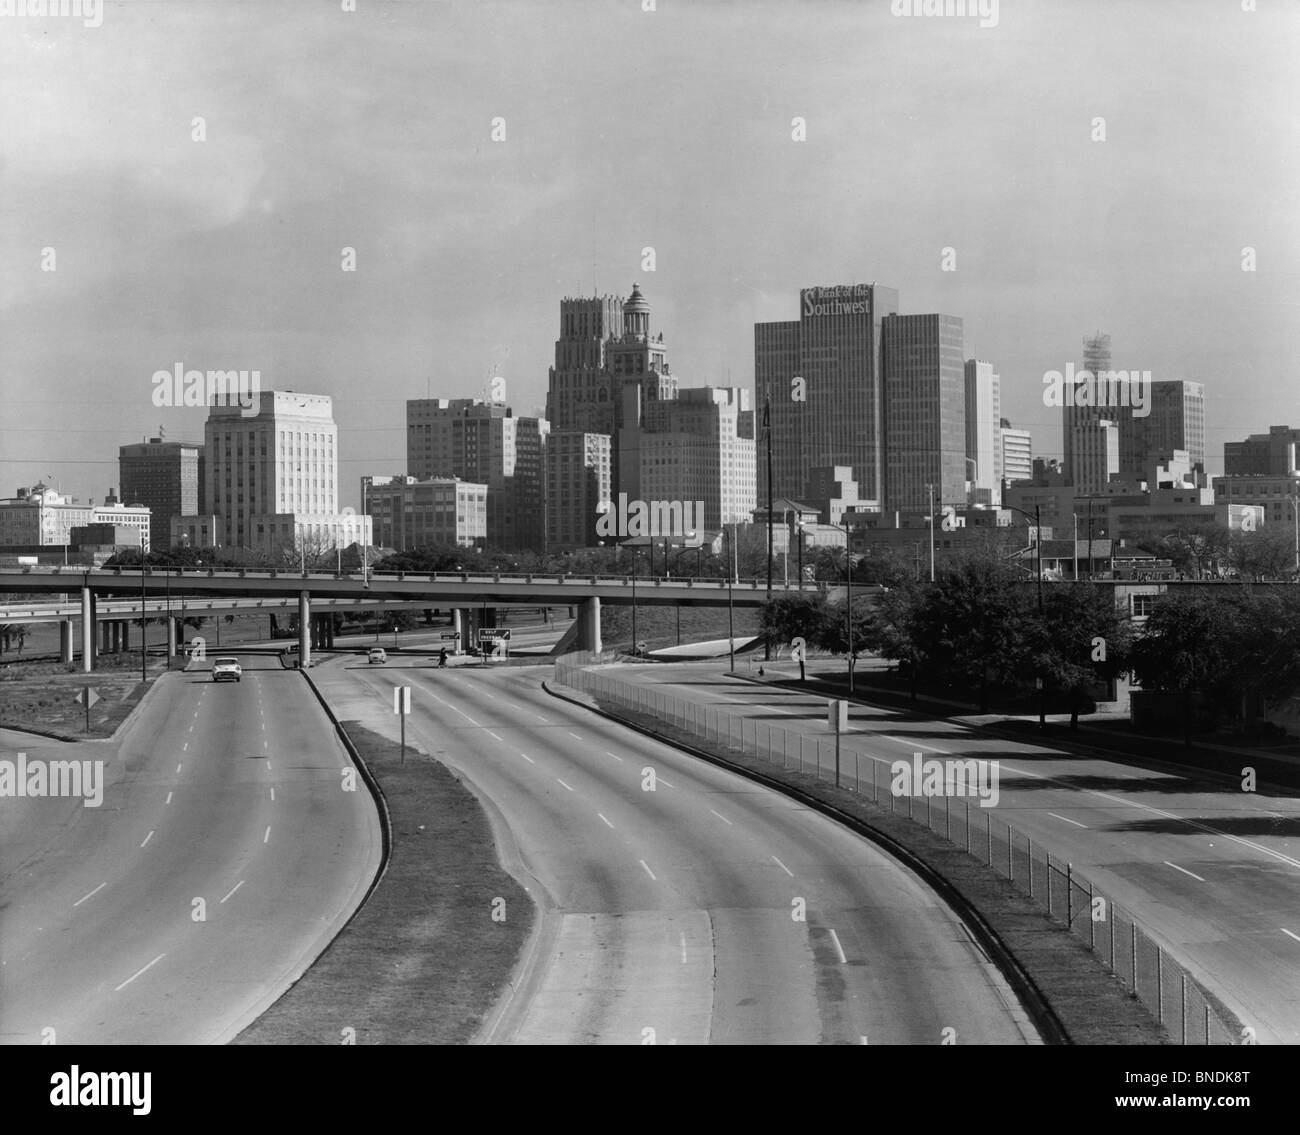 High angle view of a multiple lane highway with skyscrapers in the background, Houston, Texas, USA Stock Photo